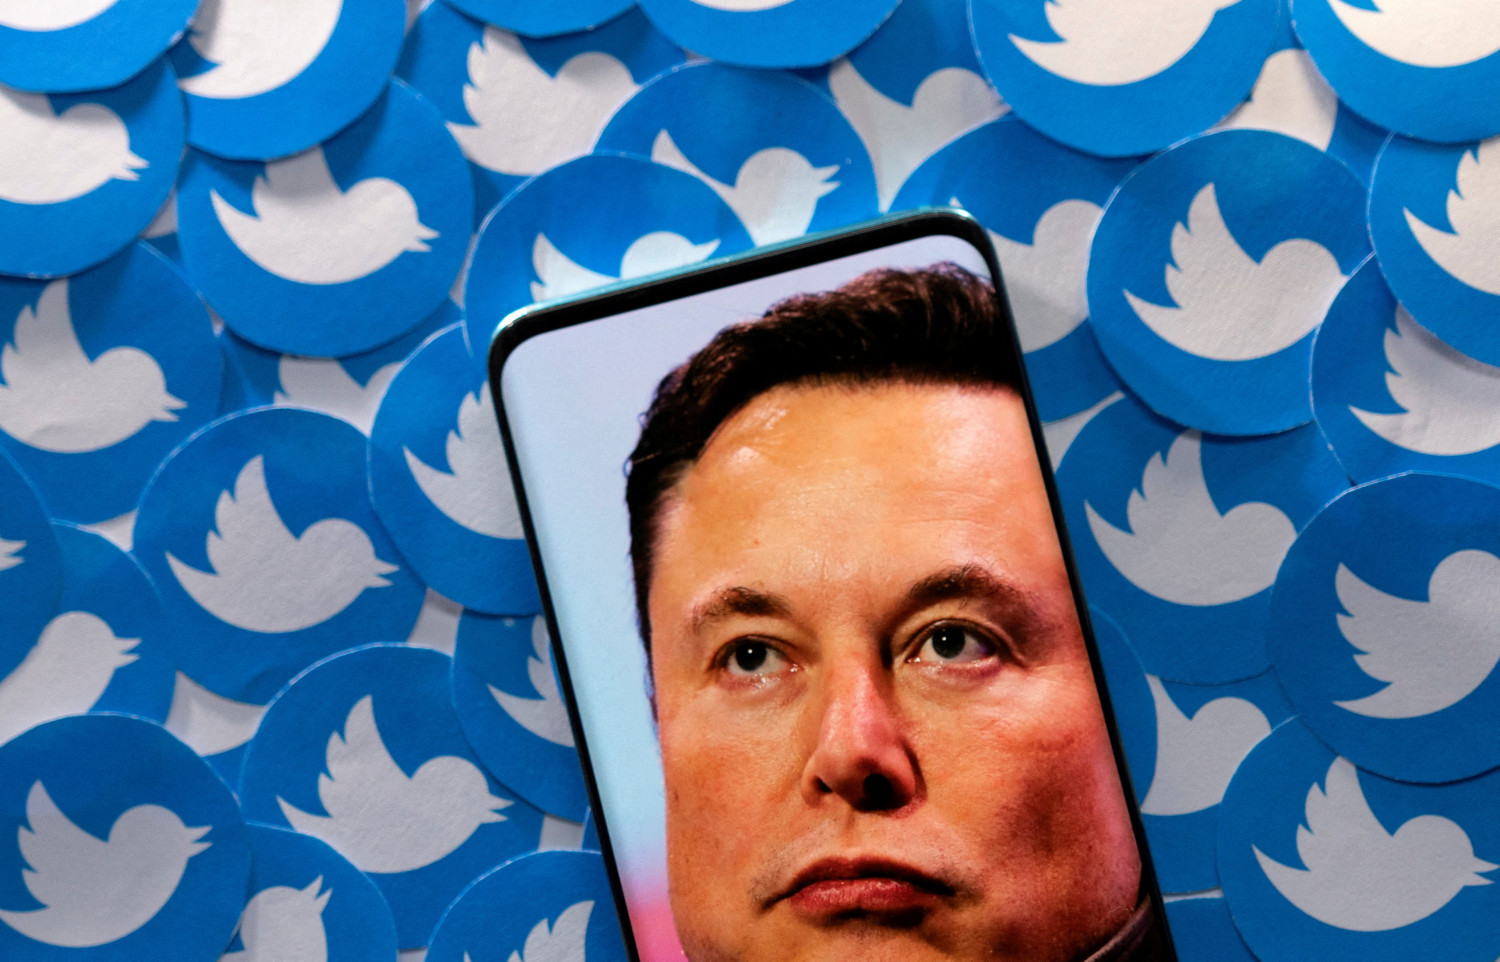 file photo illustration shows elon musk image on smartphone and printed twitter logos 